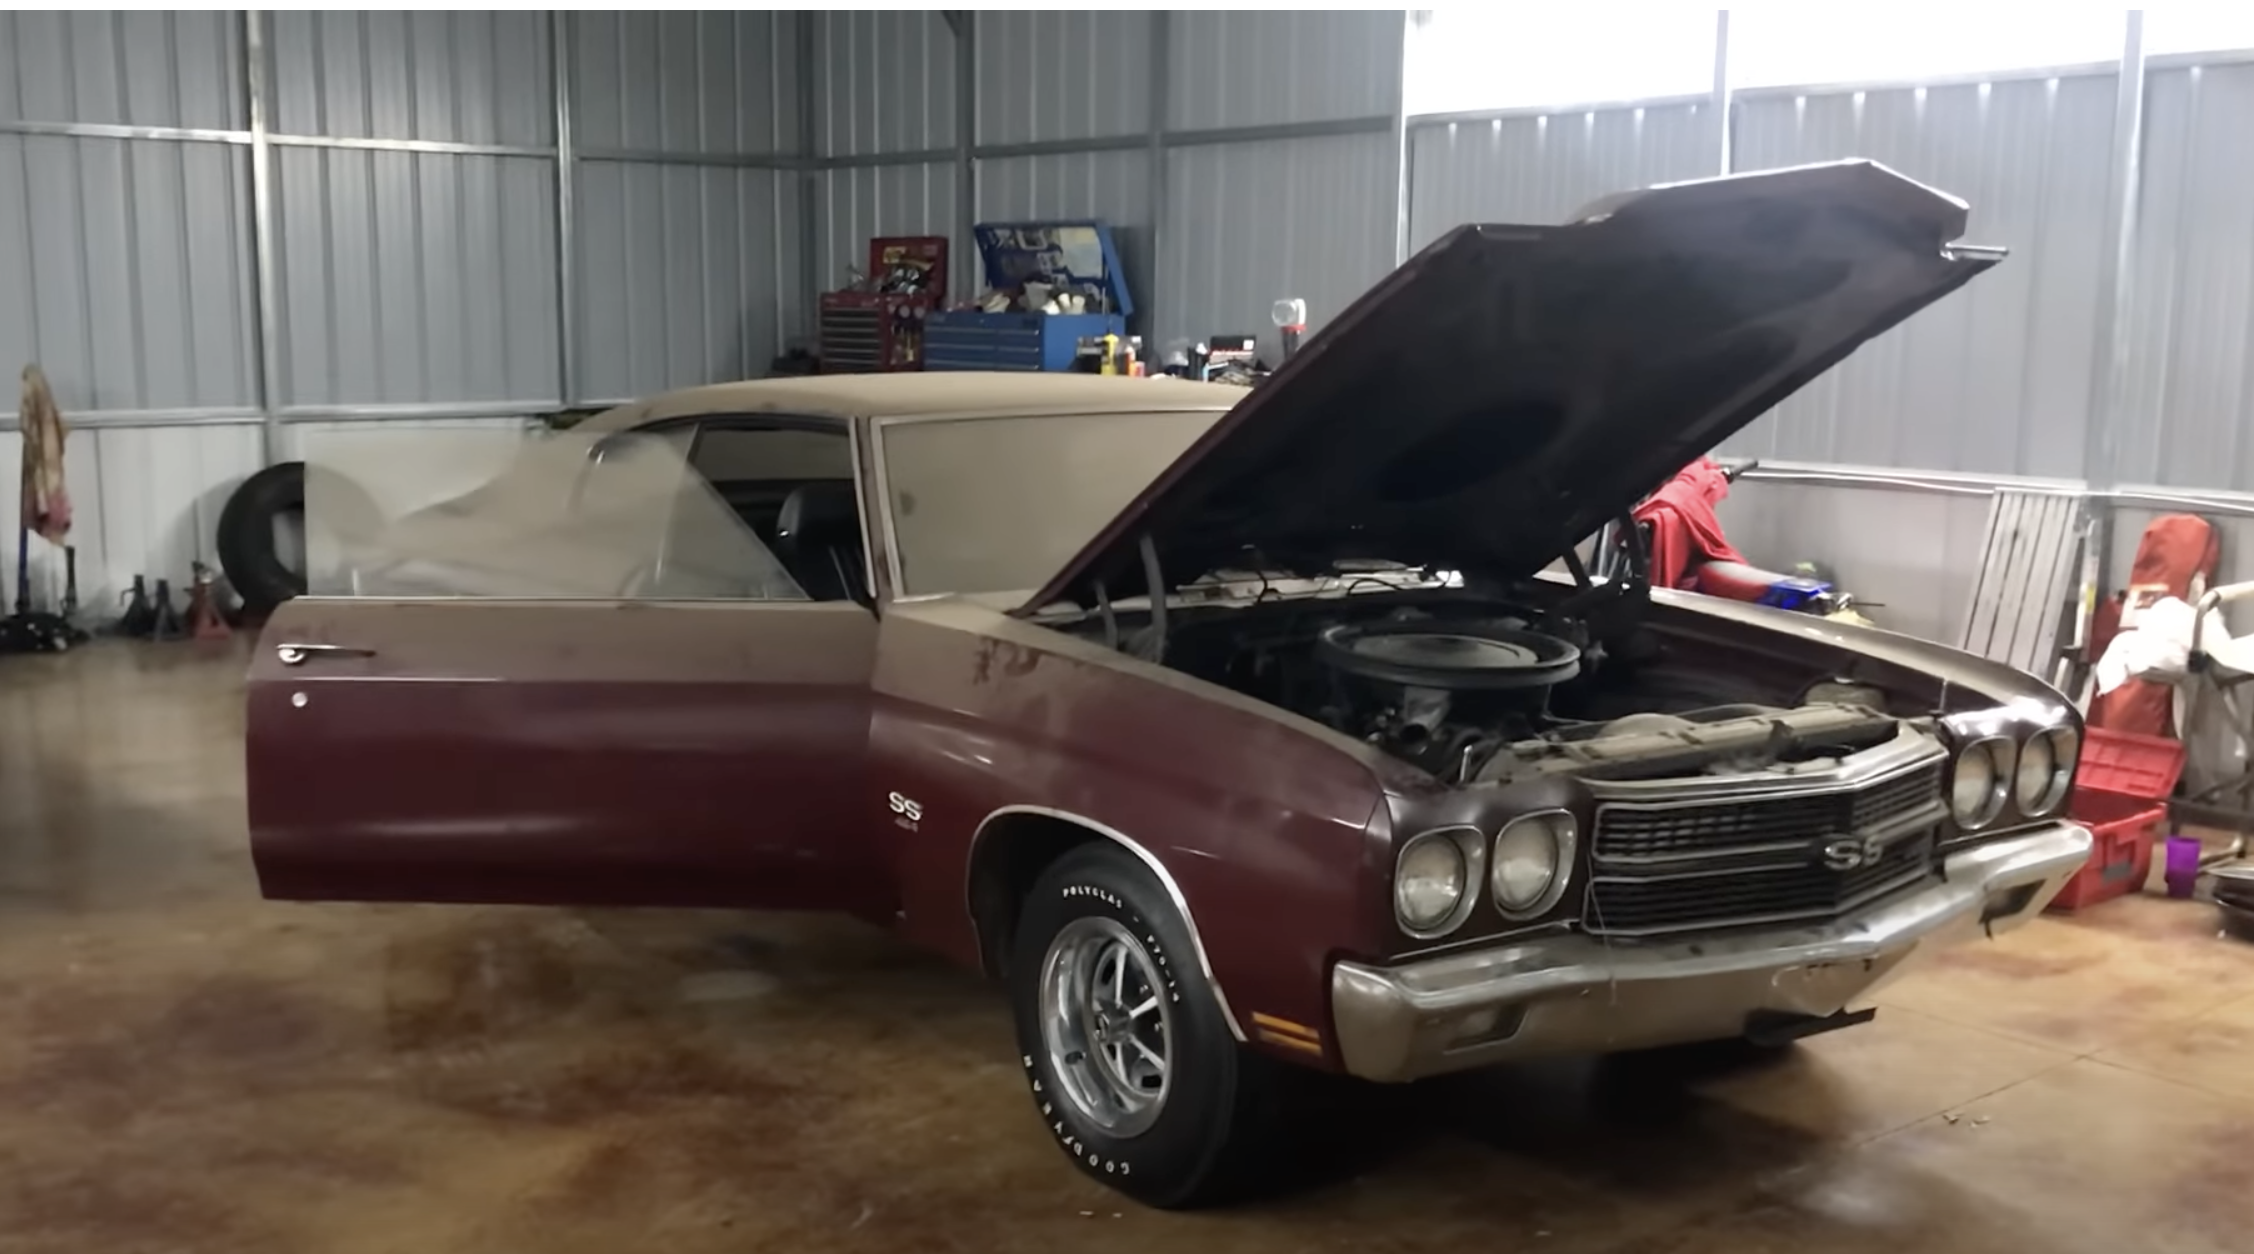 Video: 1970 Chevrolet Chevelle SS 454 LS6 Starts After 45 Years in Storage